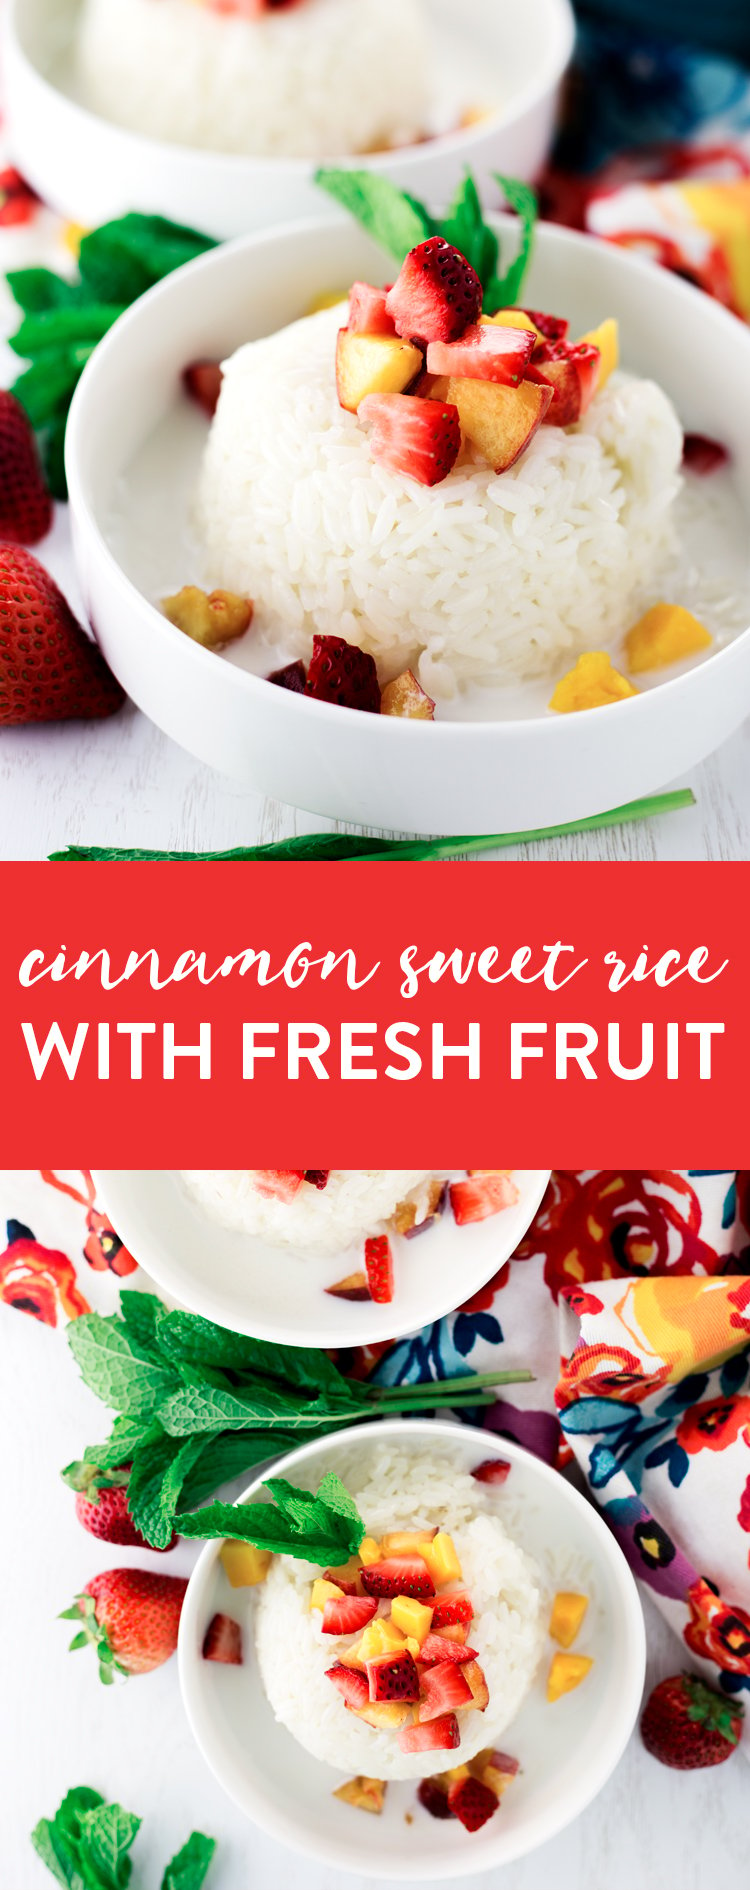 Have a simply sweet dessert when you make this Cinnamon Sweet Rice with Fresh Fruit! Mix it up with the best seasonal fruit around! | asimplepantry.com